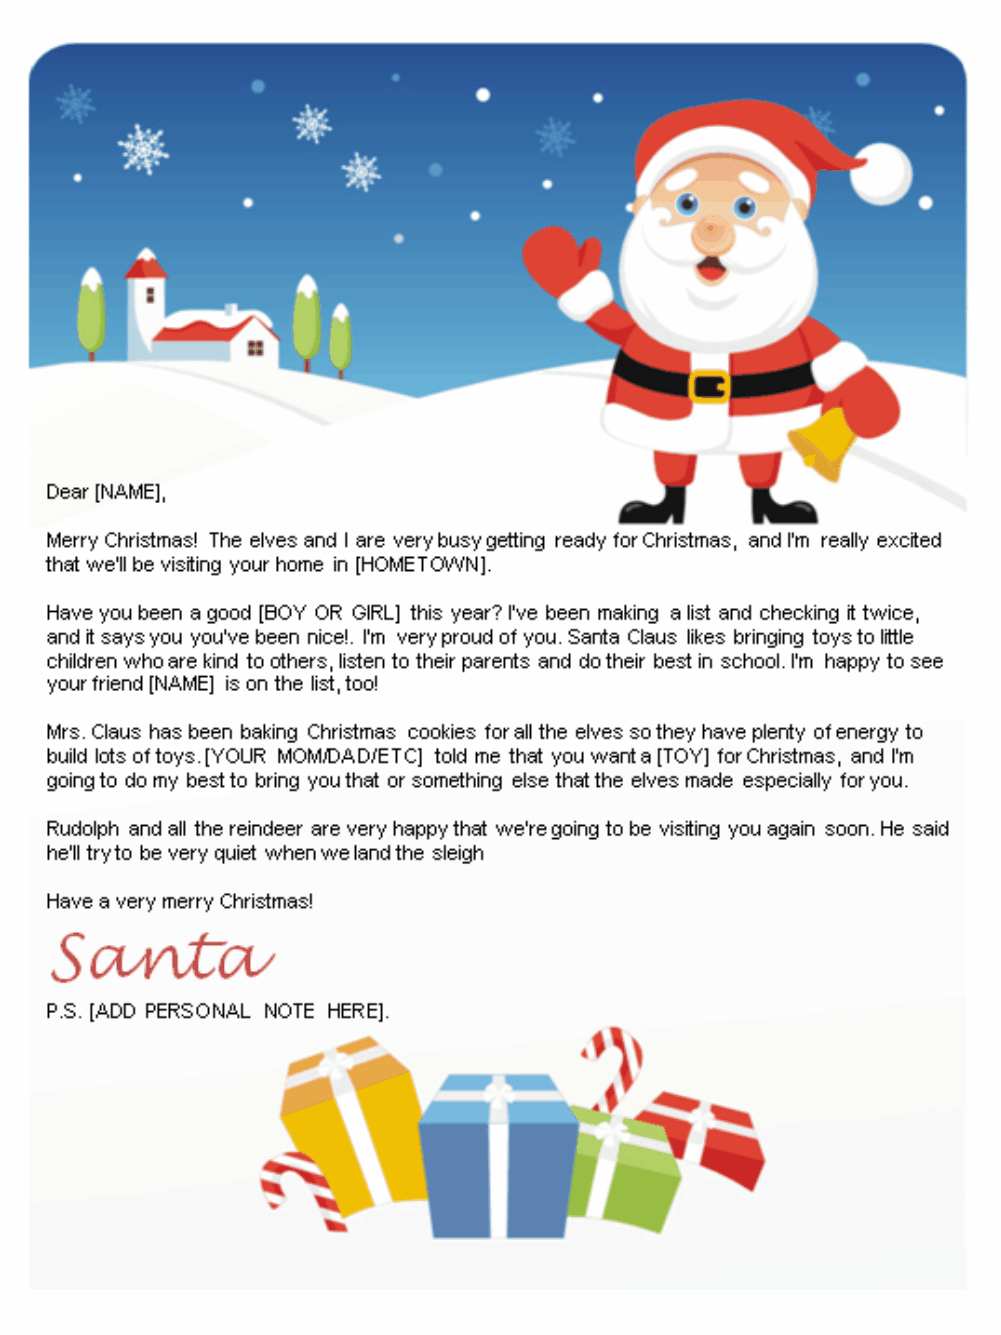 Free Letters From Santa | Santa Letters To Print At Home - Gifts - Free Personalized Printable Letters From Santa Claus